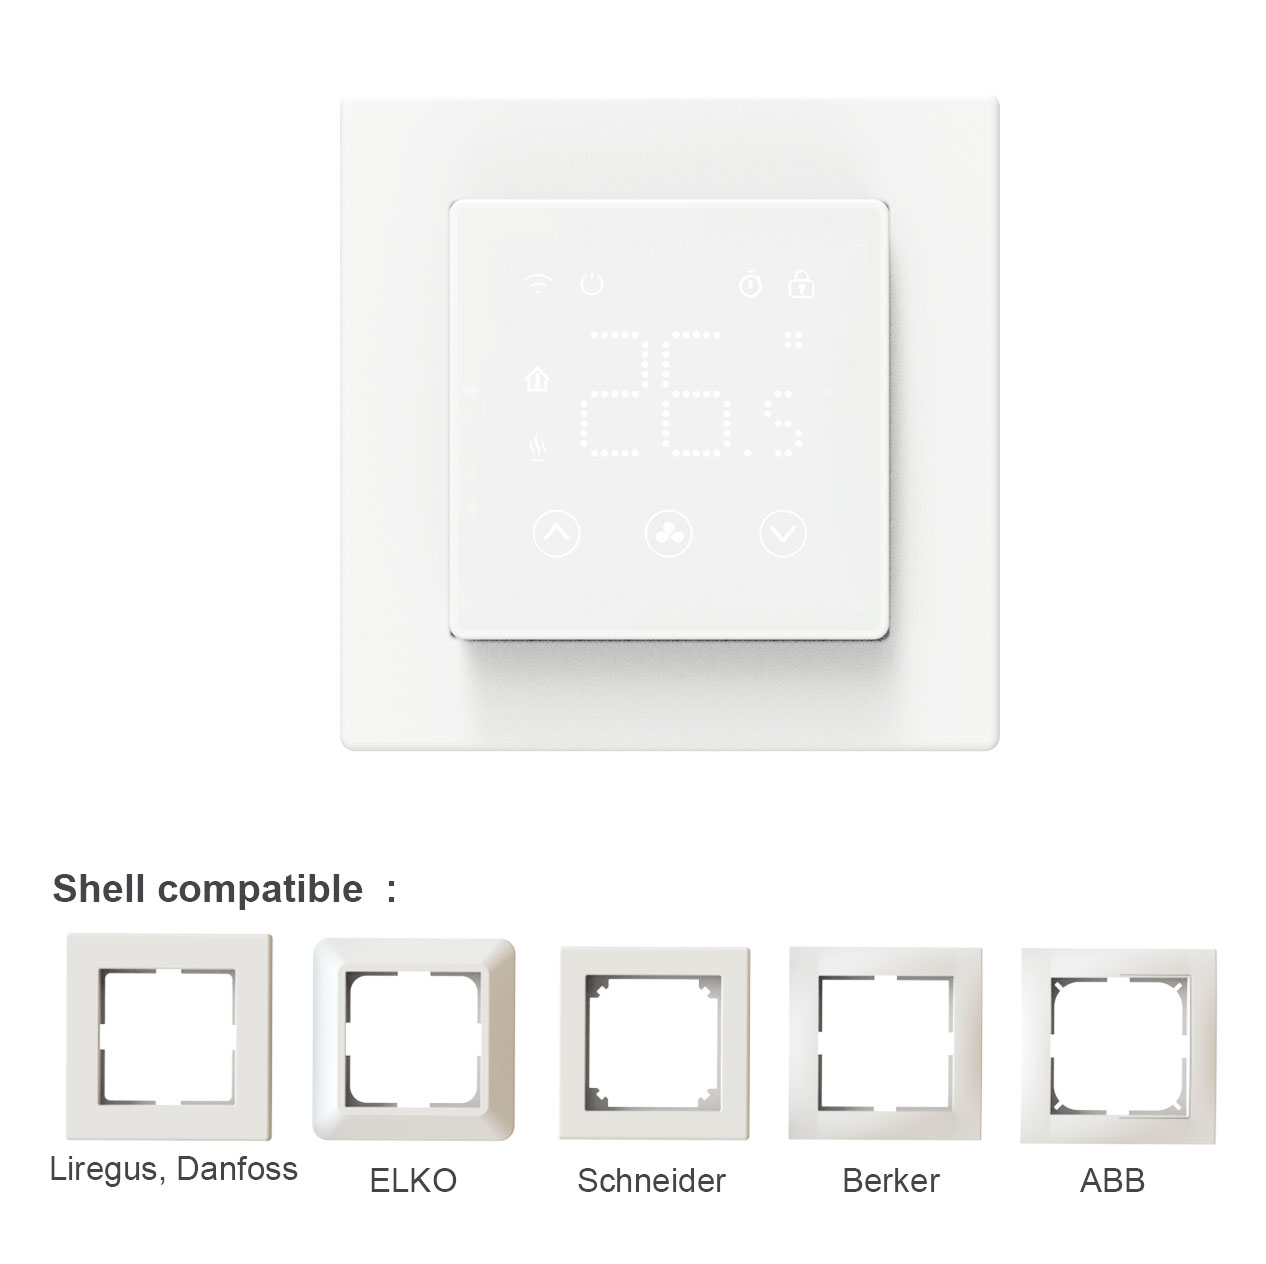 Wall Room WIFI Thermostat Heating With Replaceable Frames